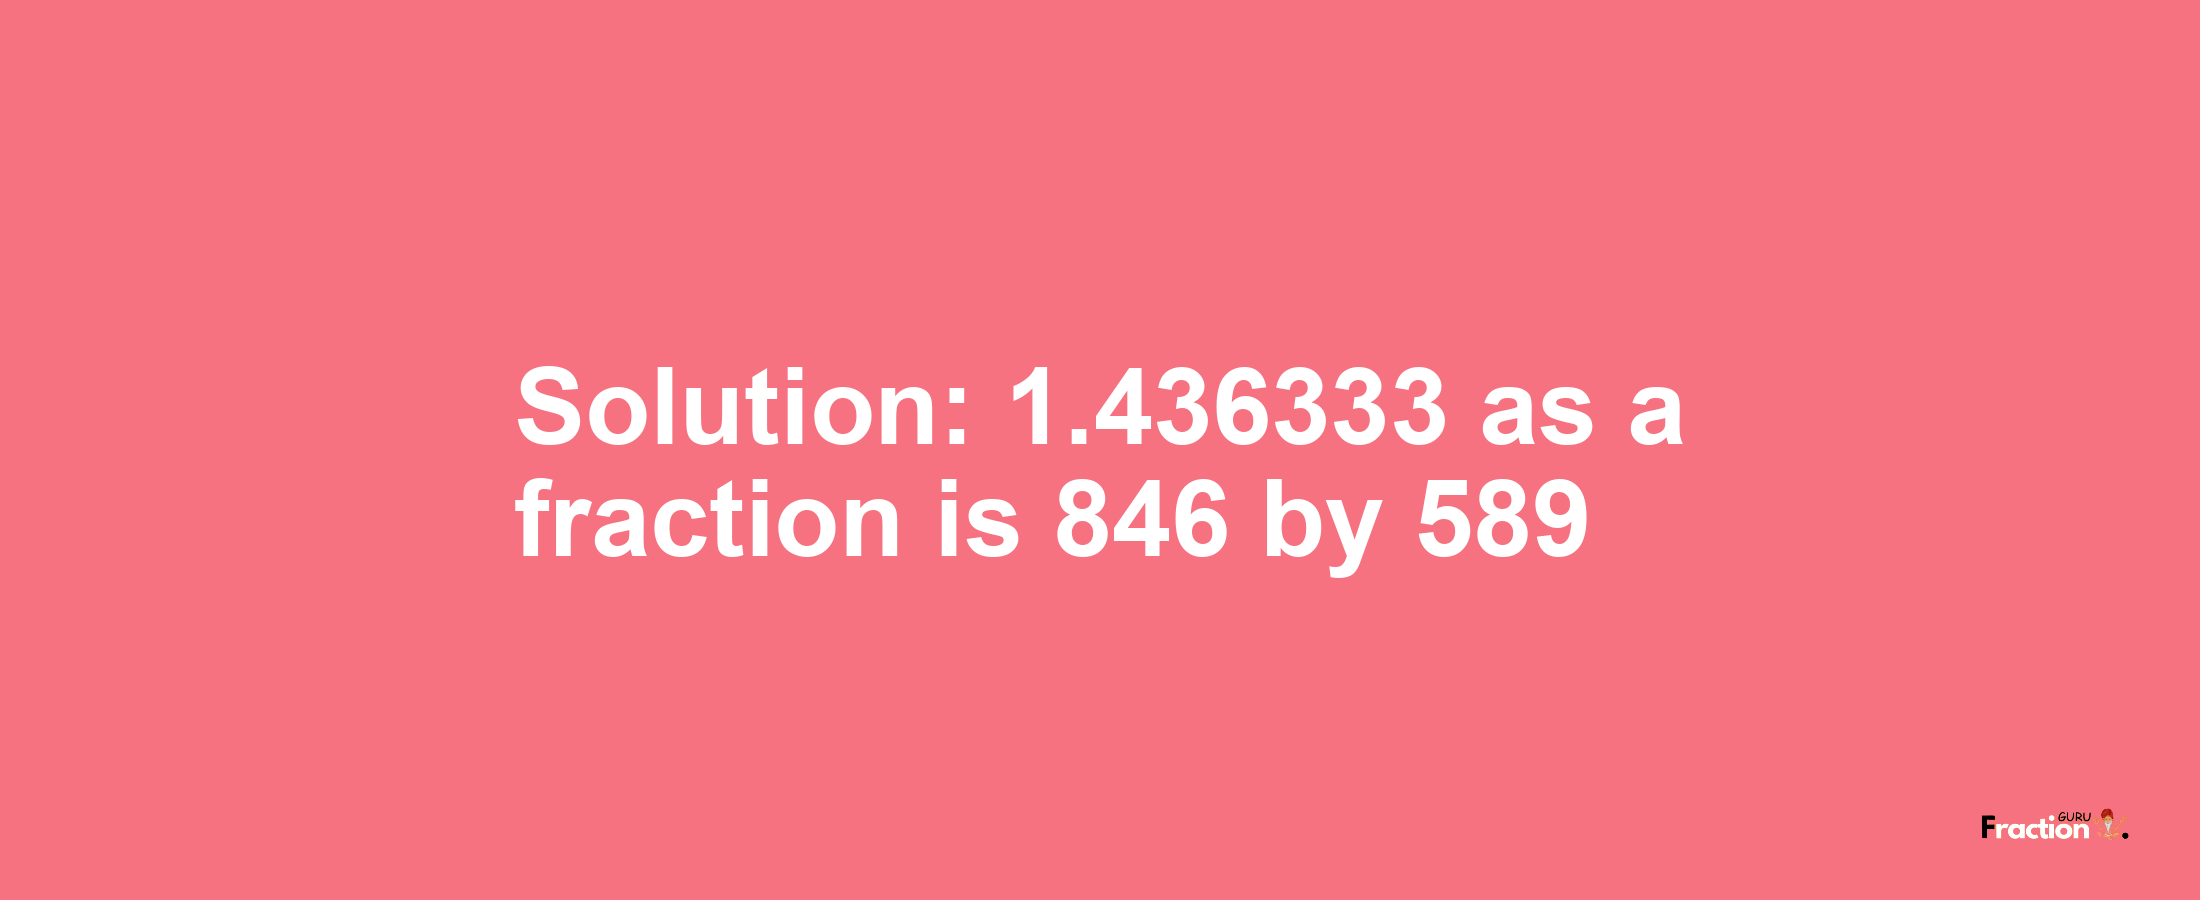 Solution:1.436333 as a fraction is 846/589